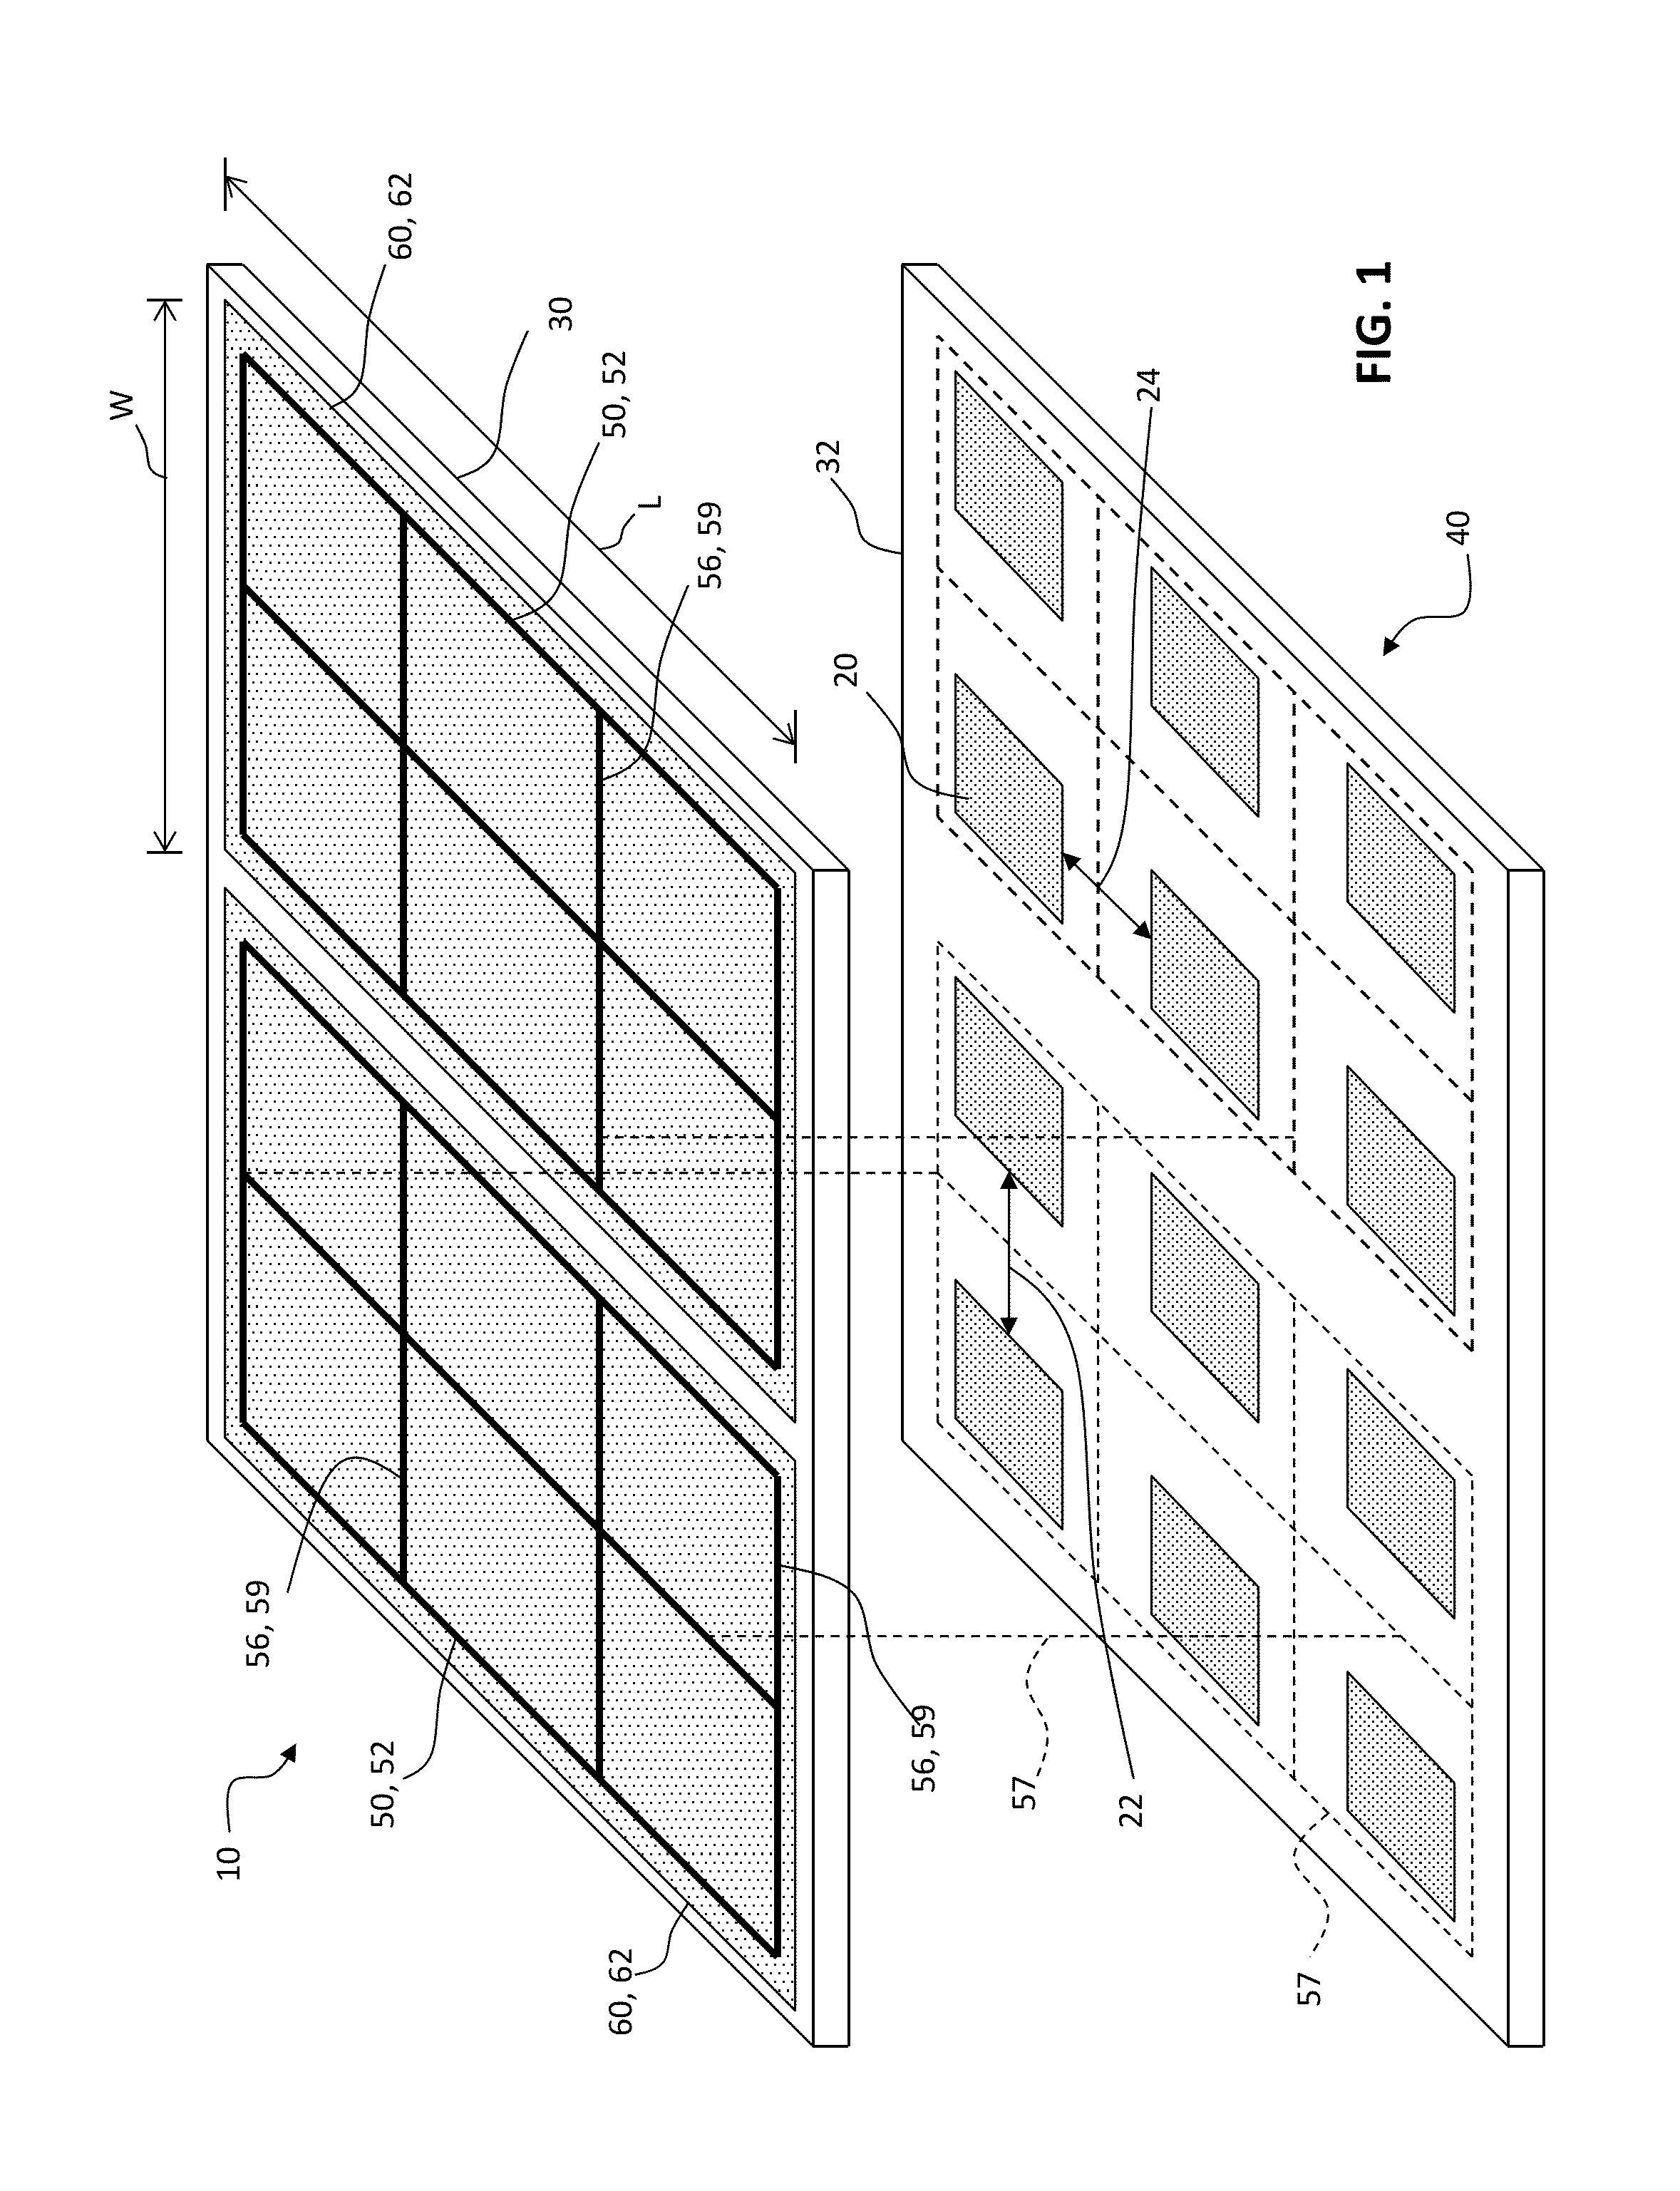 Making display device with pixel-aligned micro-wire electrode